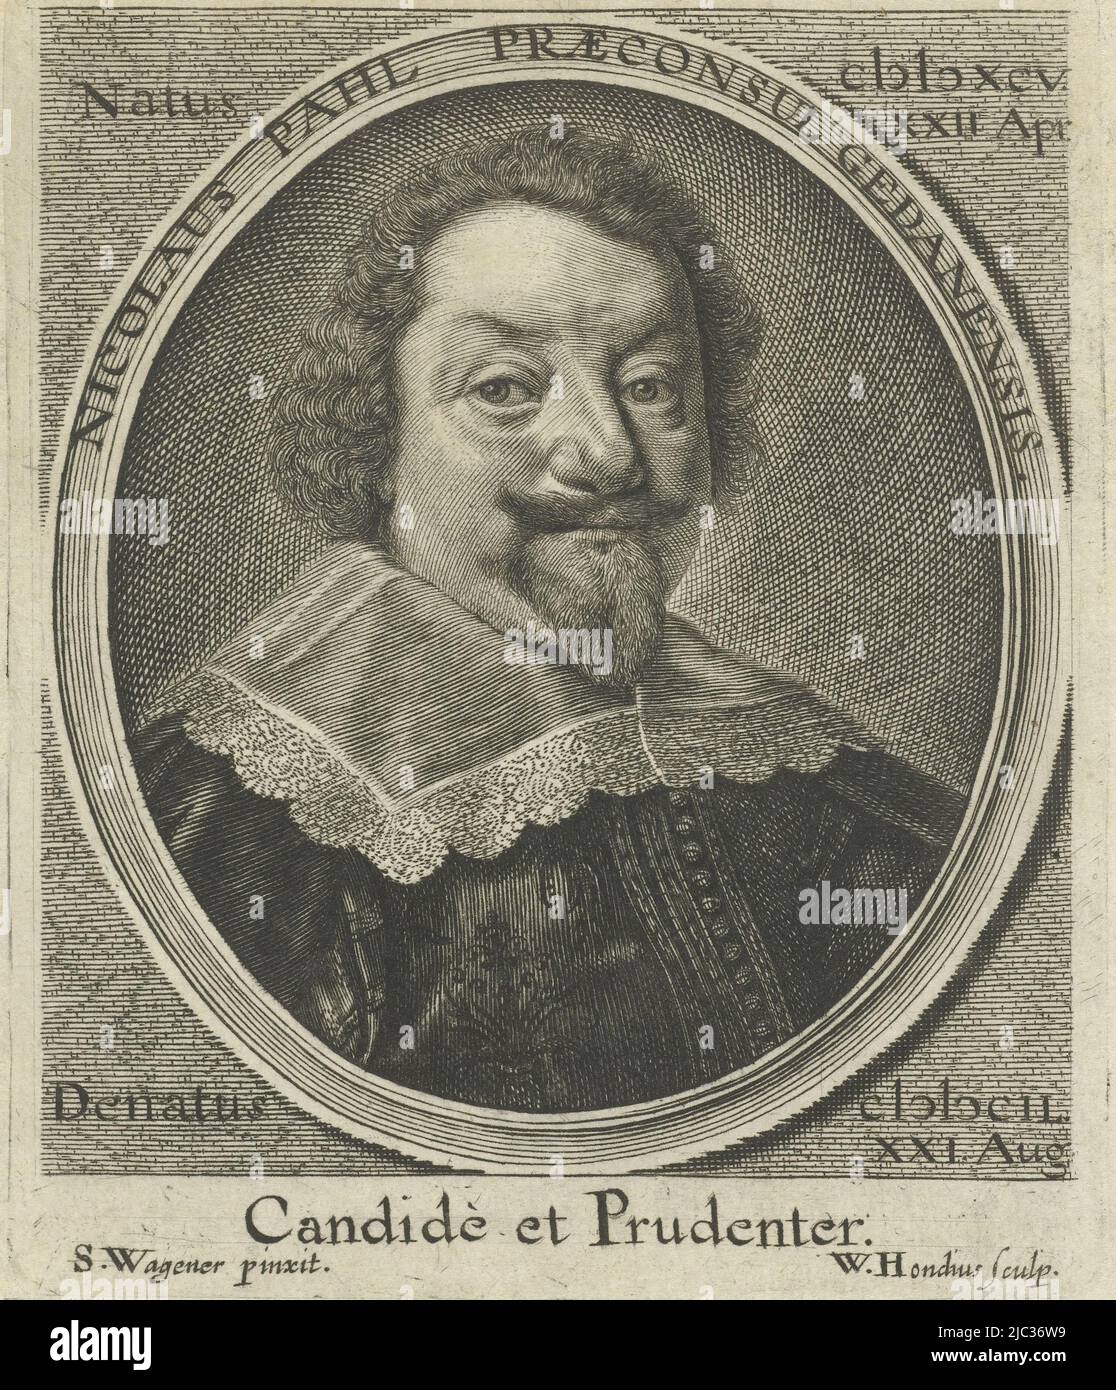 Bust to the right of Nicolas Pahl in an oval frame with edge lettering in Latin. Below the portrait a second printing with six-line text by the author Johann Petrus Titius., Portrait of Nicolas Pahl Nicolaus Pahl Praeconsul Gedansis (title on object), print maker: Willem Hondius, (mentioned on object), after: Salomon Wegner, (mentioned on object), Johann Peter Titz, (mentioned on object), Poland, in or after 1650, paper, engraving, etching, h 119 mm × w 100 mm × h 29 mm × w 99 mm Stock Photo